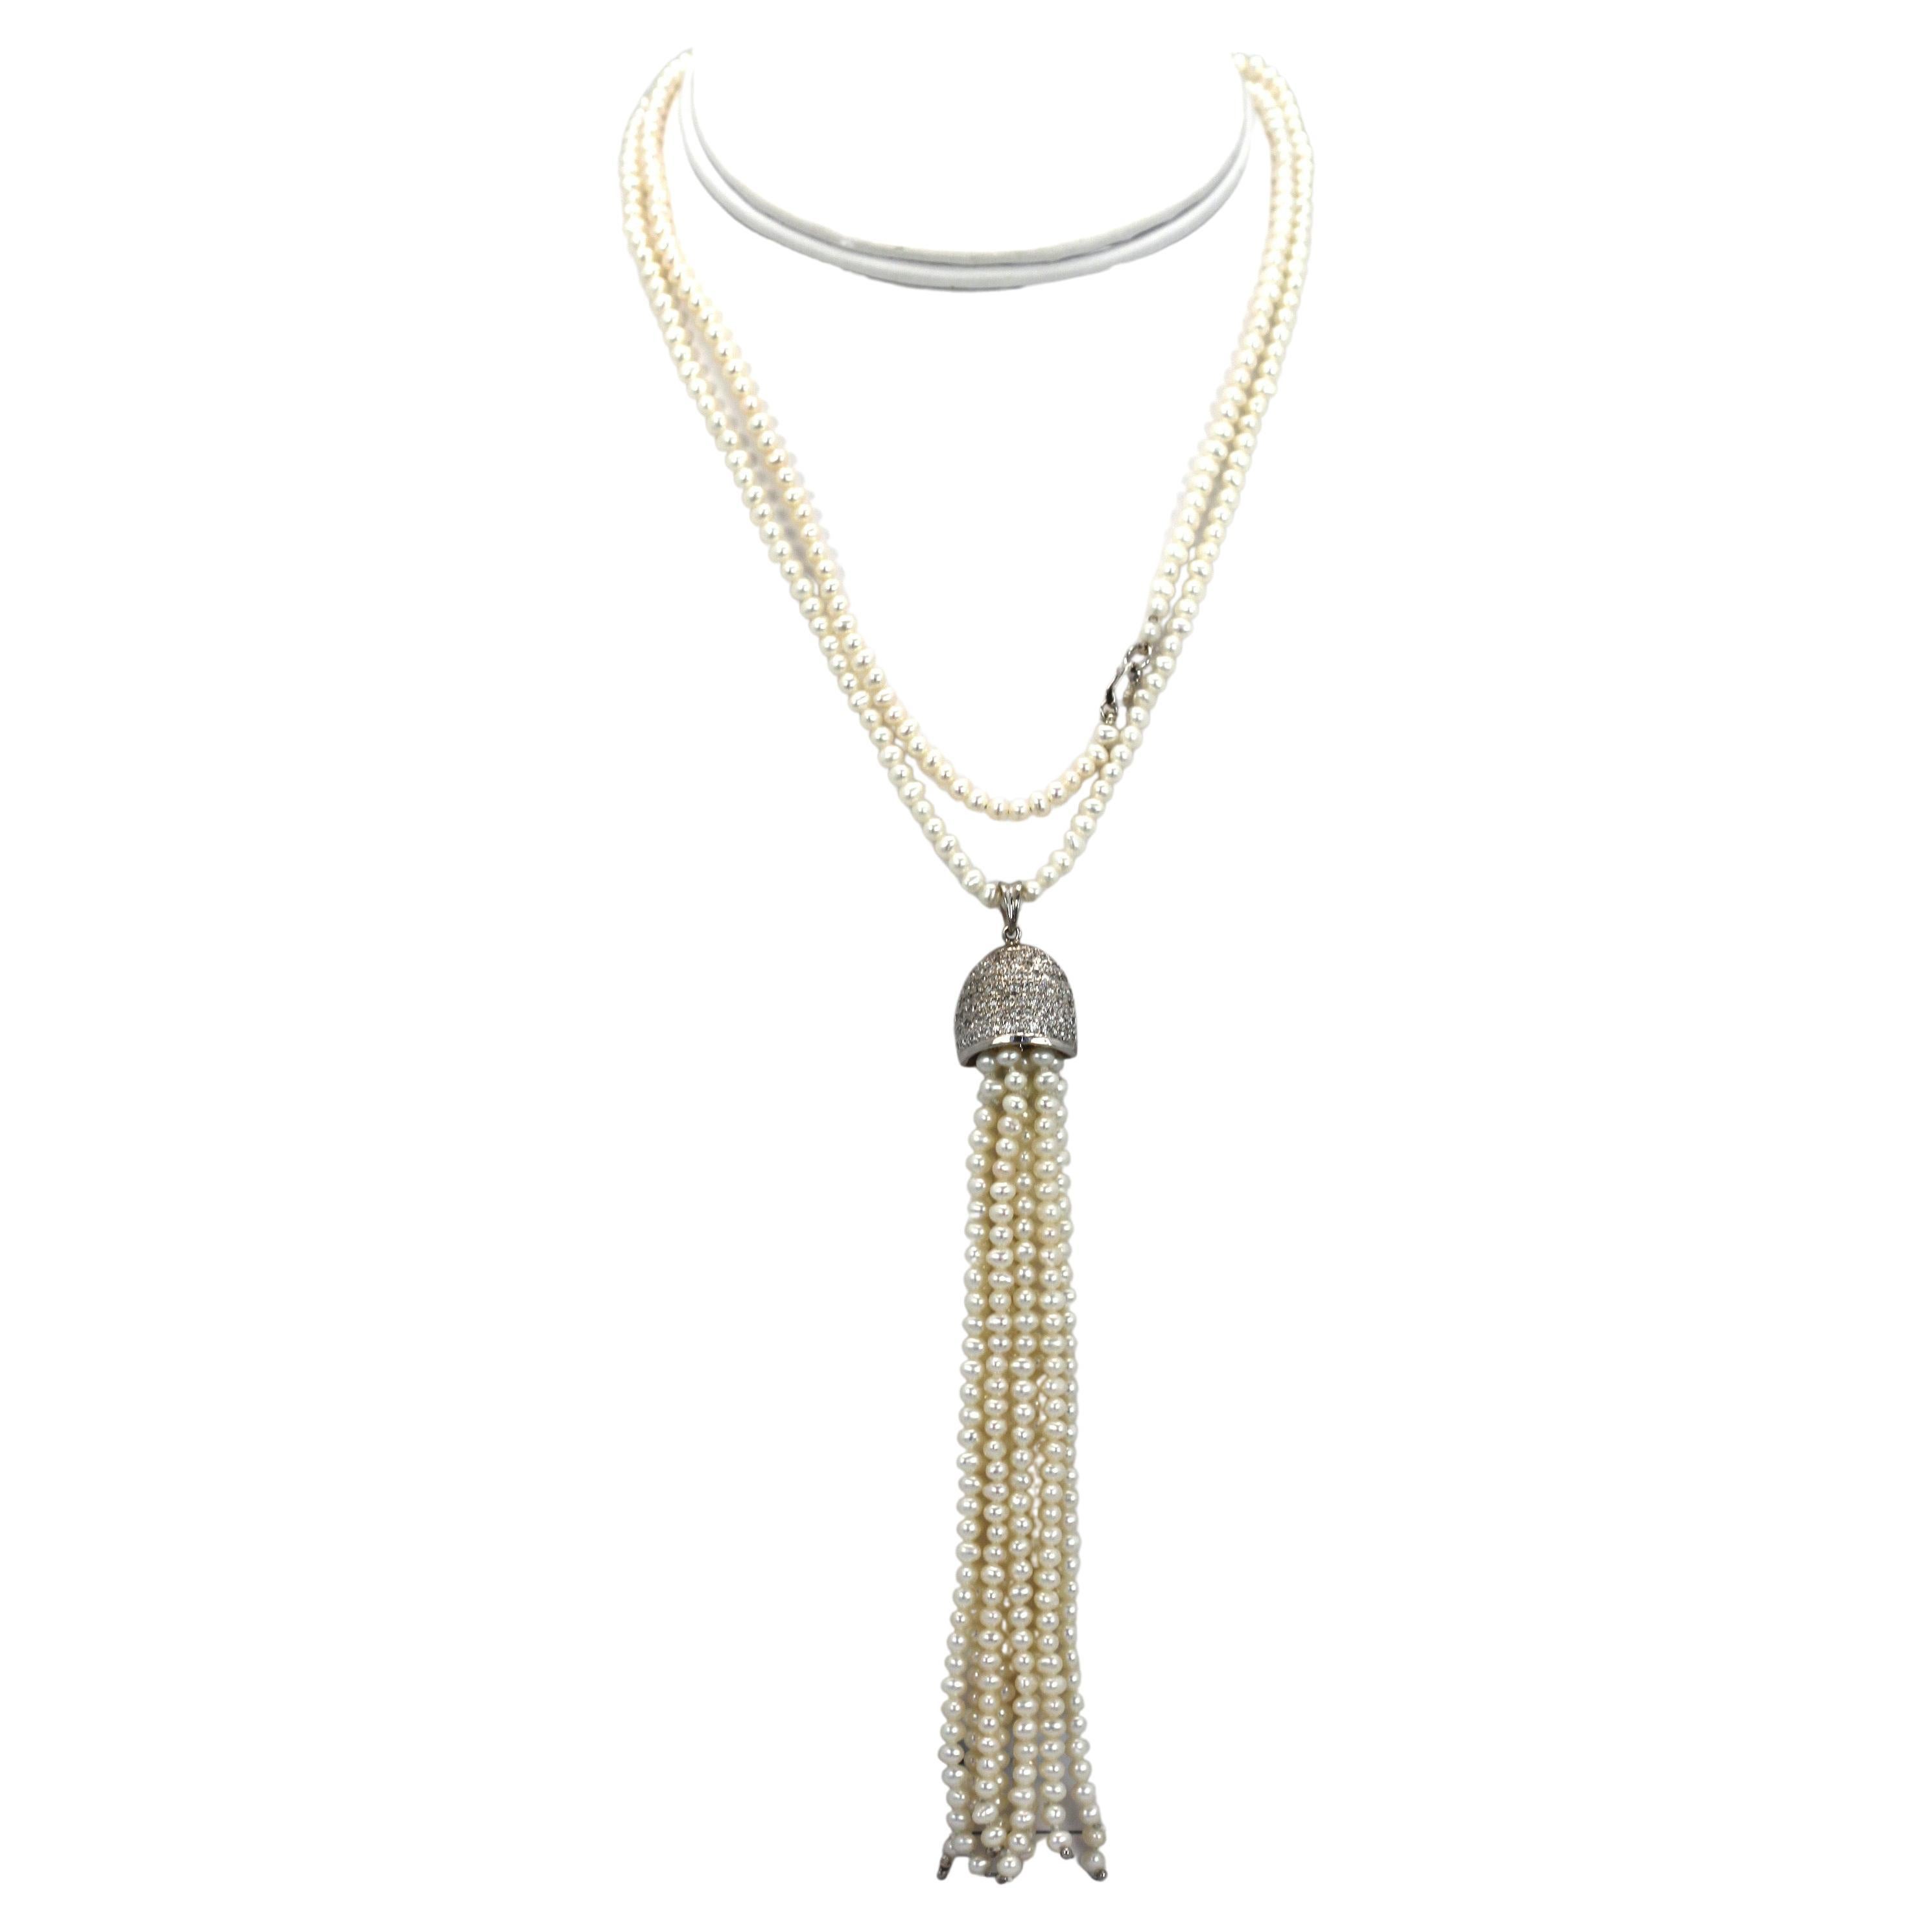 LIAO Jewelry Long Tassel Pendant Necklace Y Shaped India | Ubuy